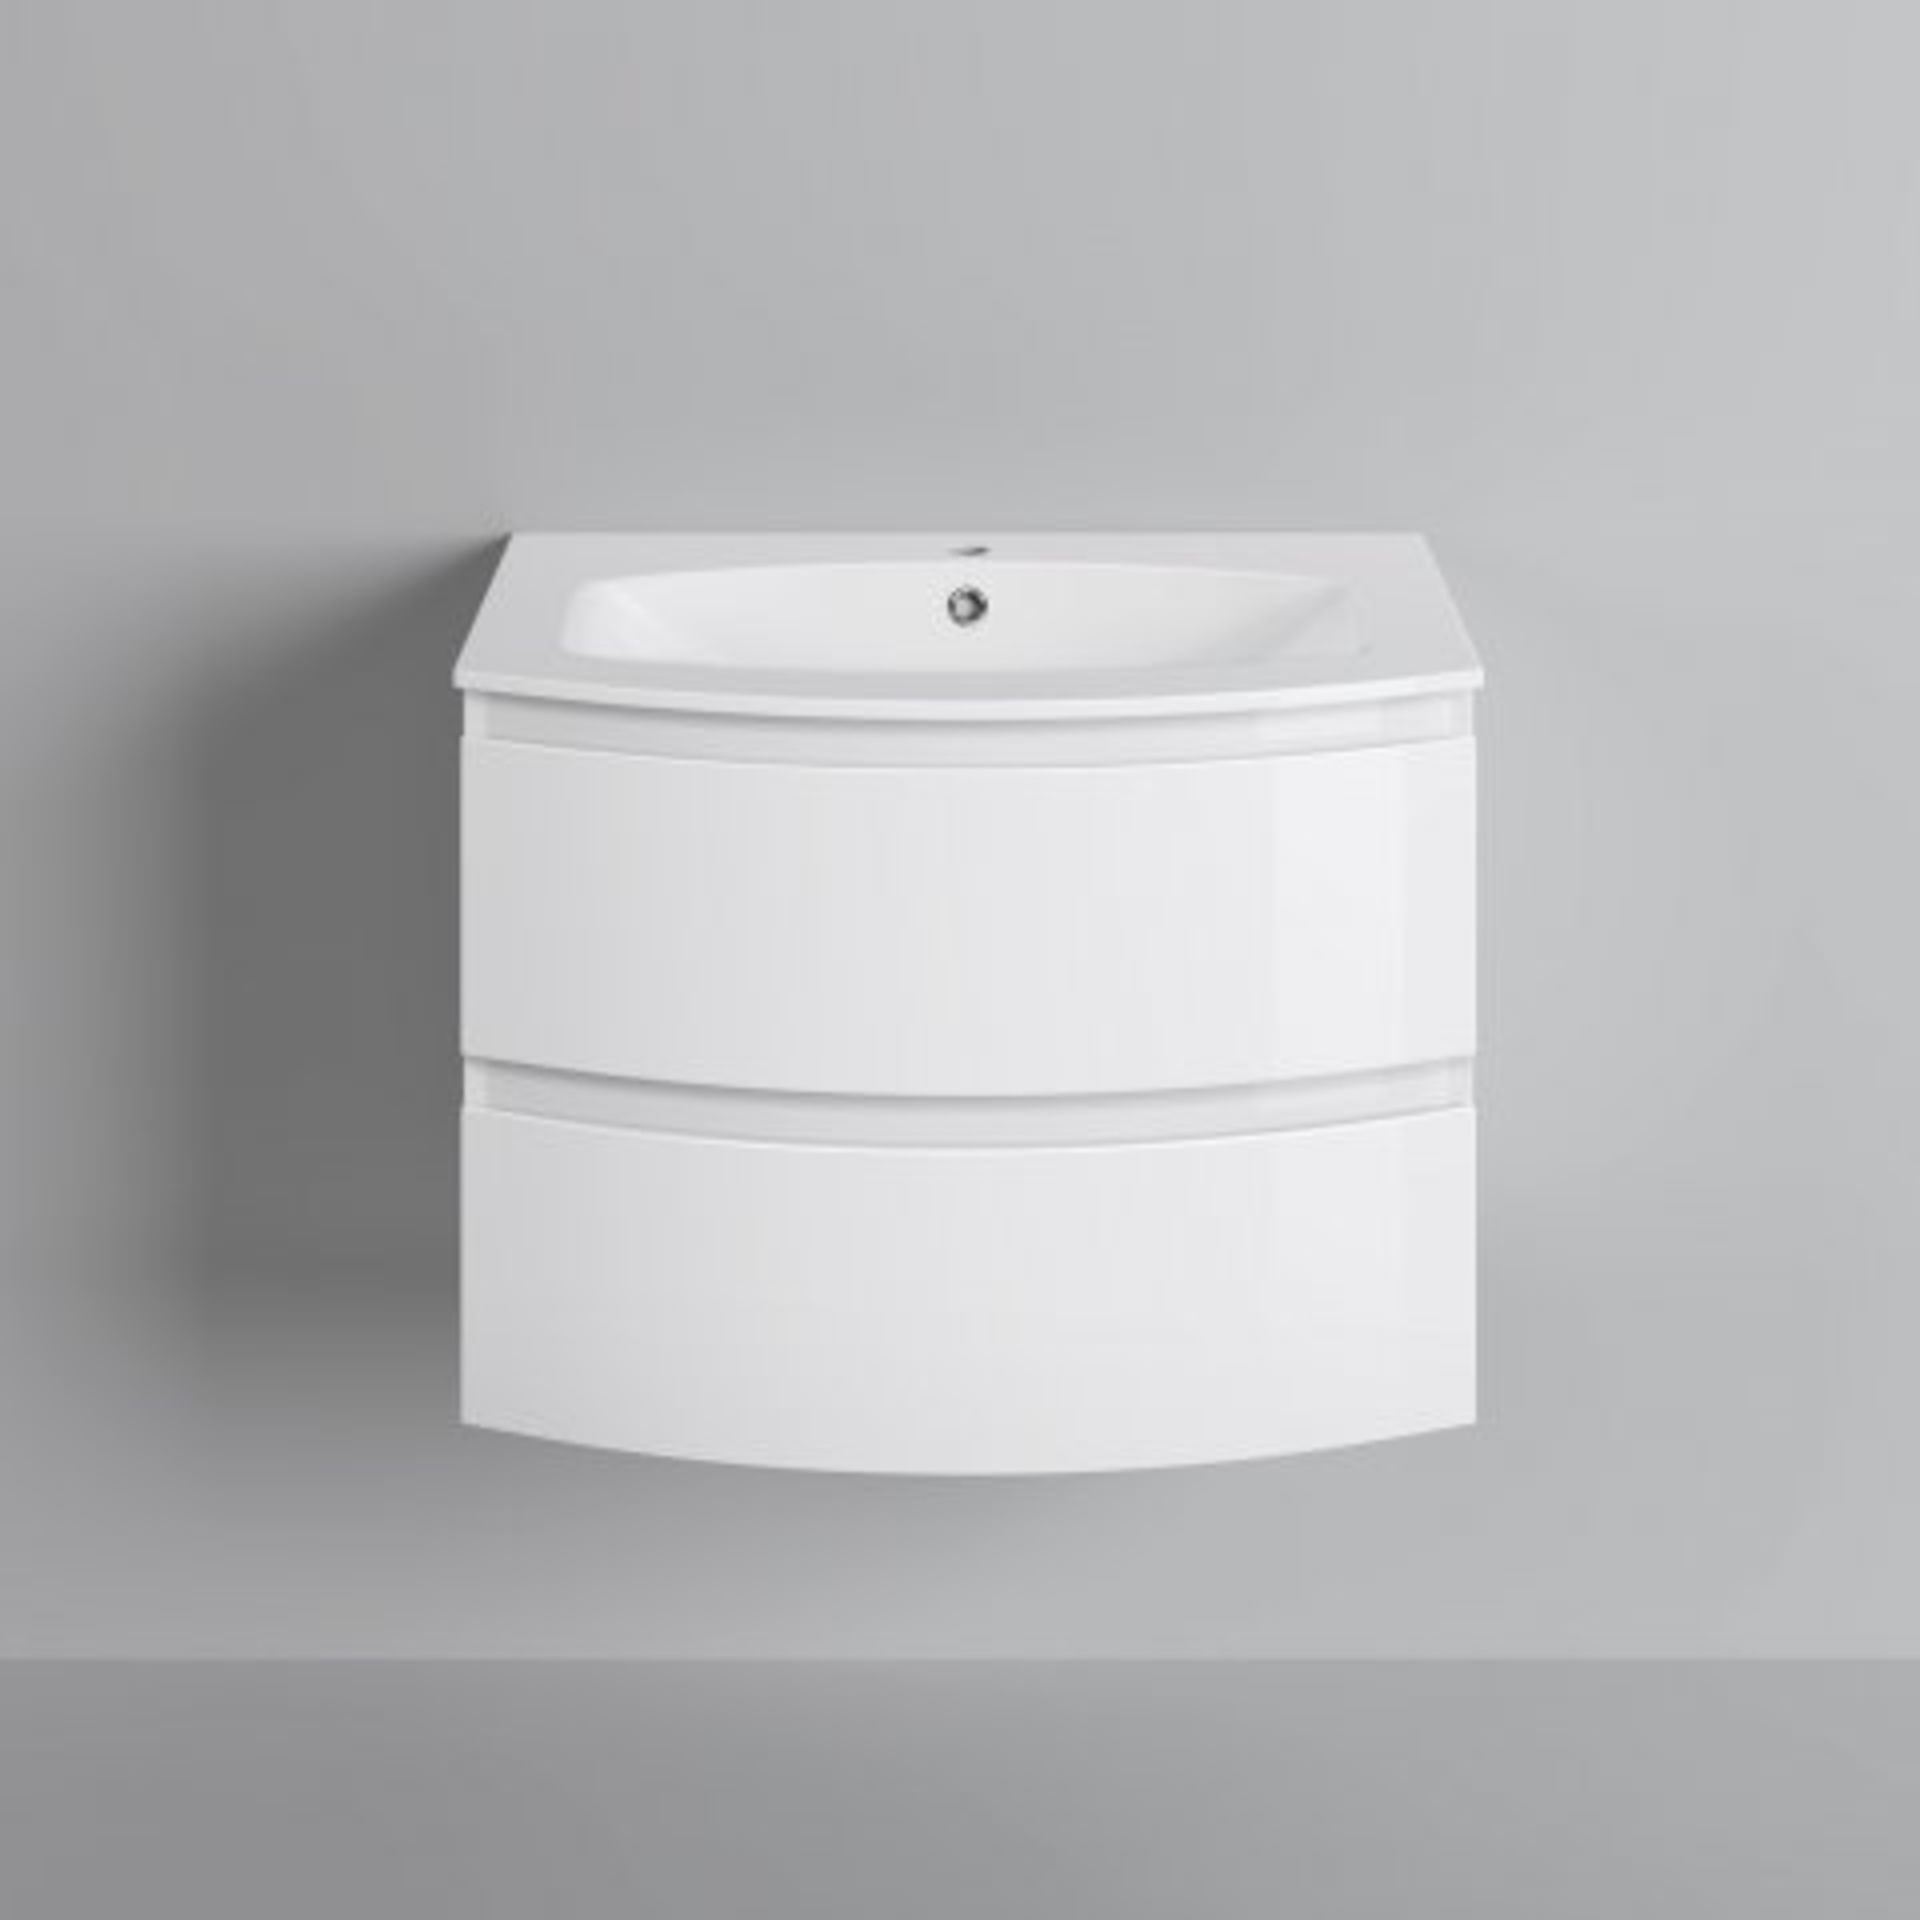 Pallet To Contain 5 x 700mm Amelie High Gloss White Curved Vanity Unit - Wall Hung. RRP £649.99 - Image 4 of 5